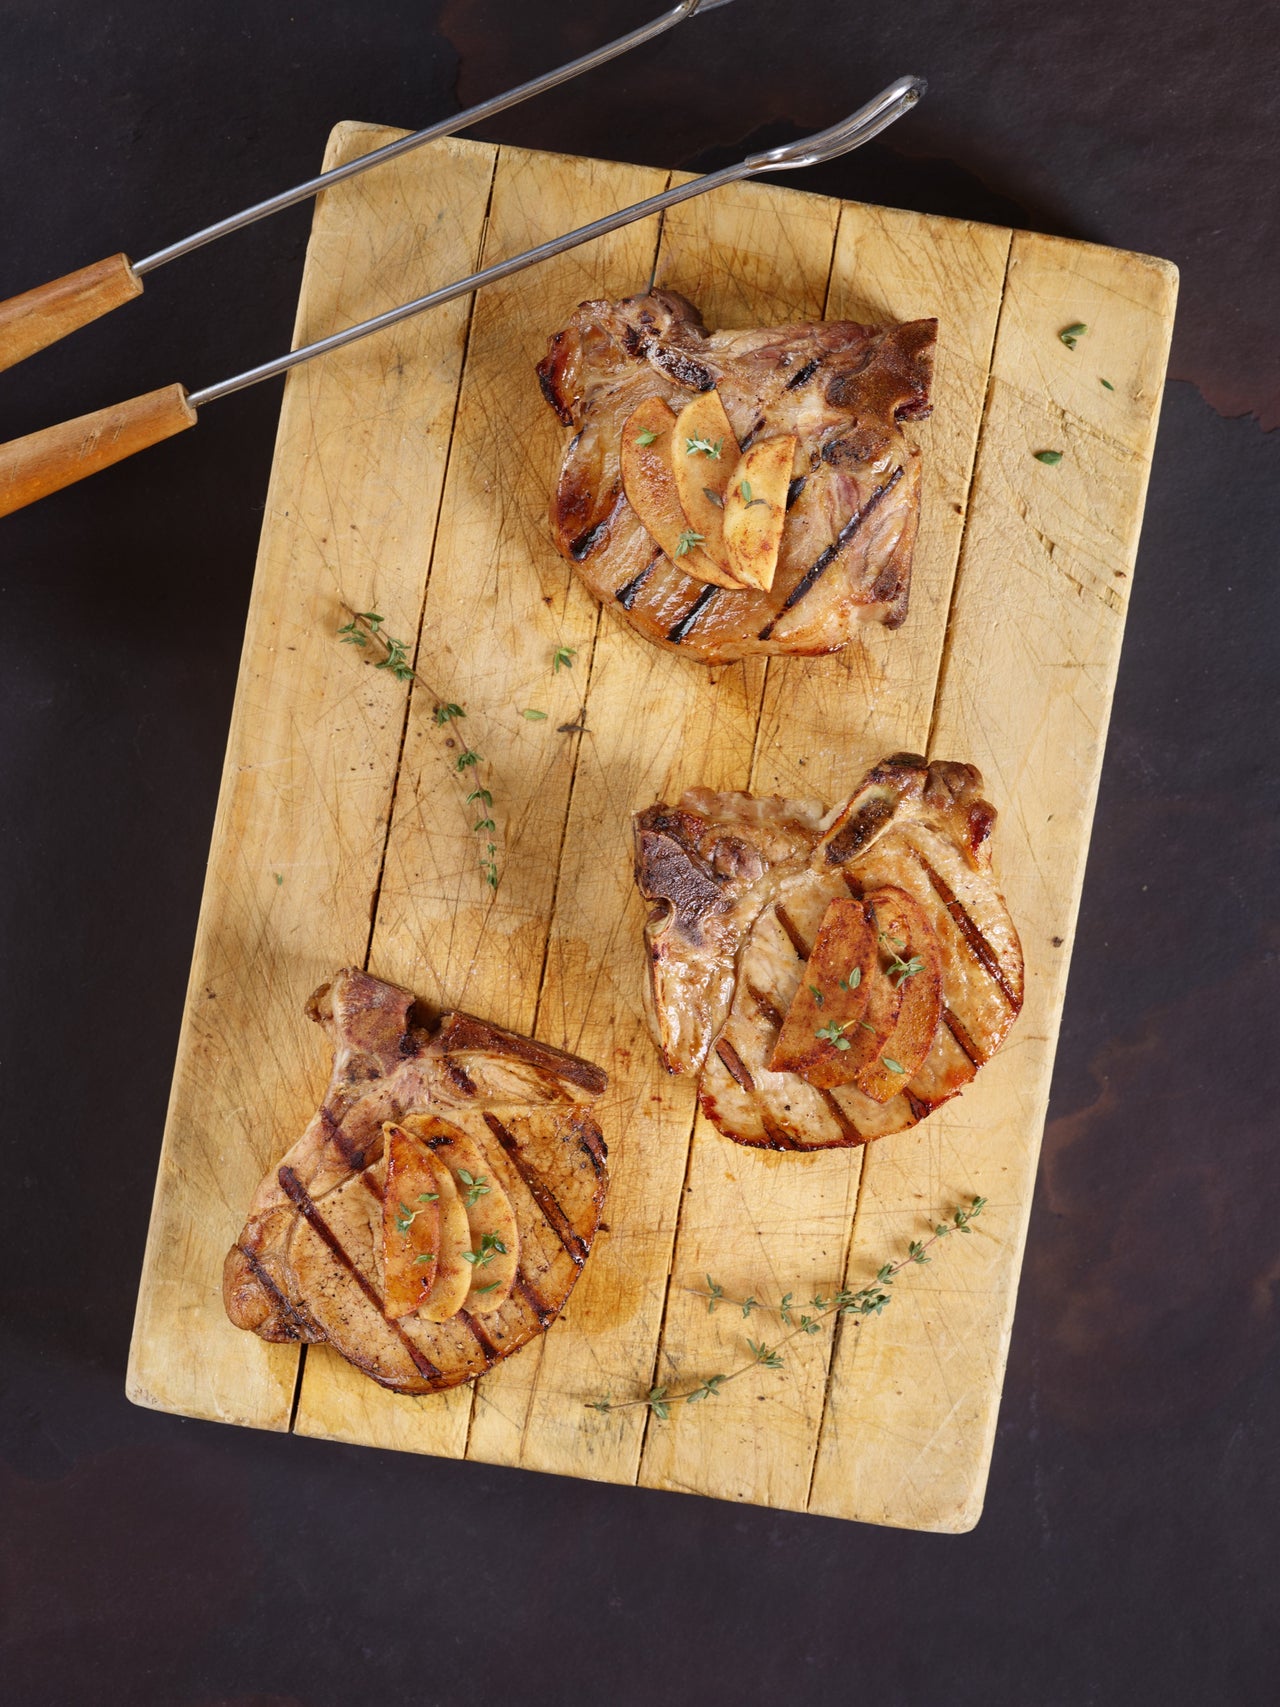 Apple Cider Brined Chops on the Grill with Spiced & Sliced Apples